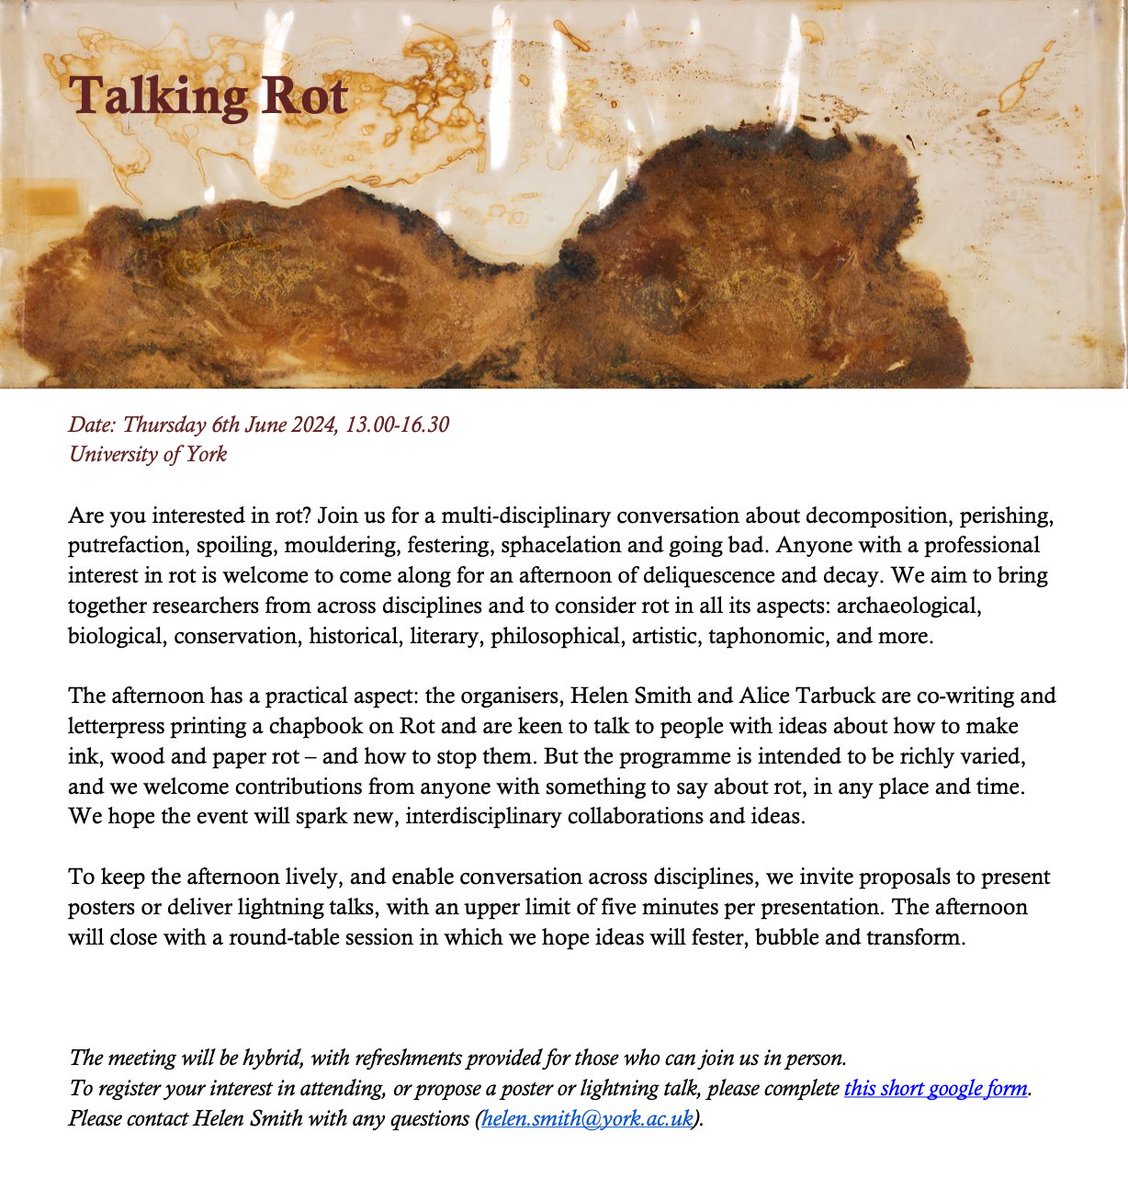 Are you interested in #rot? Join me and the fabulous @atarbuck for a fun afternoon of deliquescence and decay! Please spread the word: we want to be omnidisciplinary, & warmly welcome all pertinent (& some impertinent) contributions. forms.gle/BD4sGYaVPReTh4…